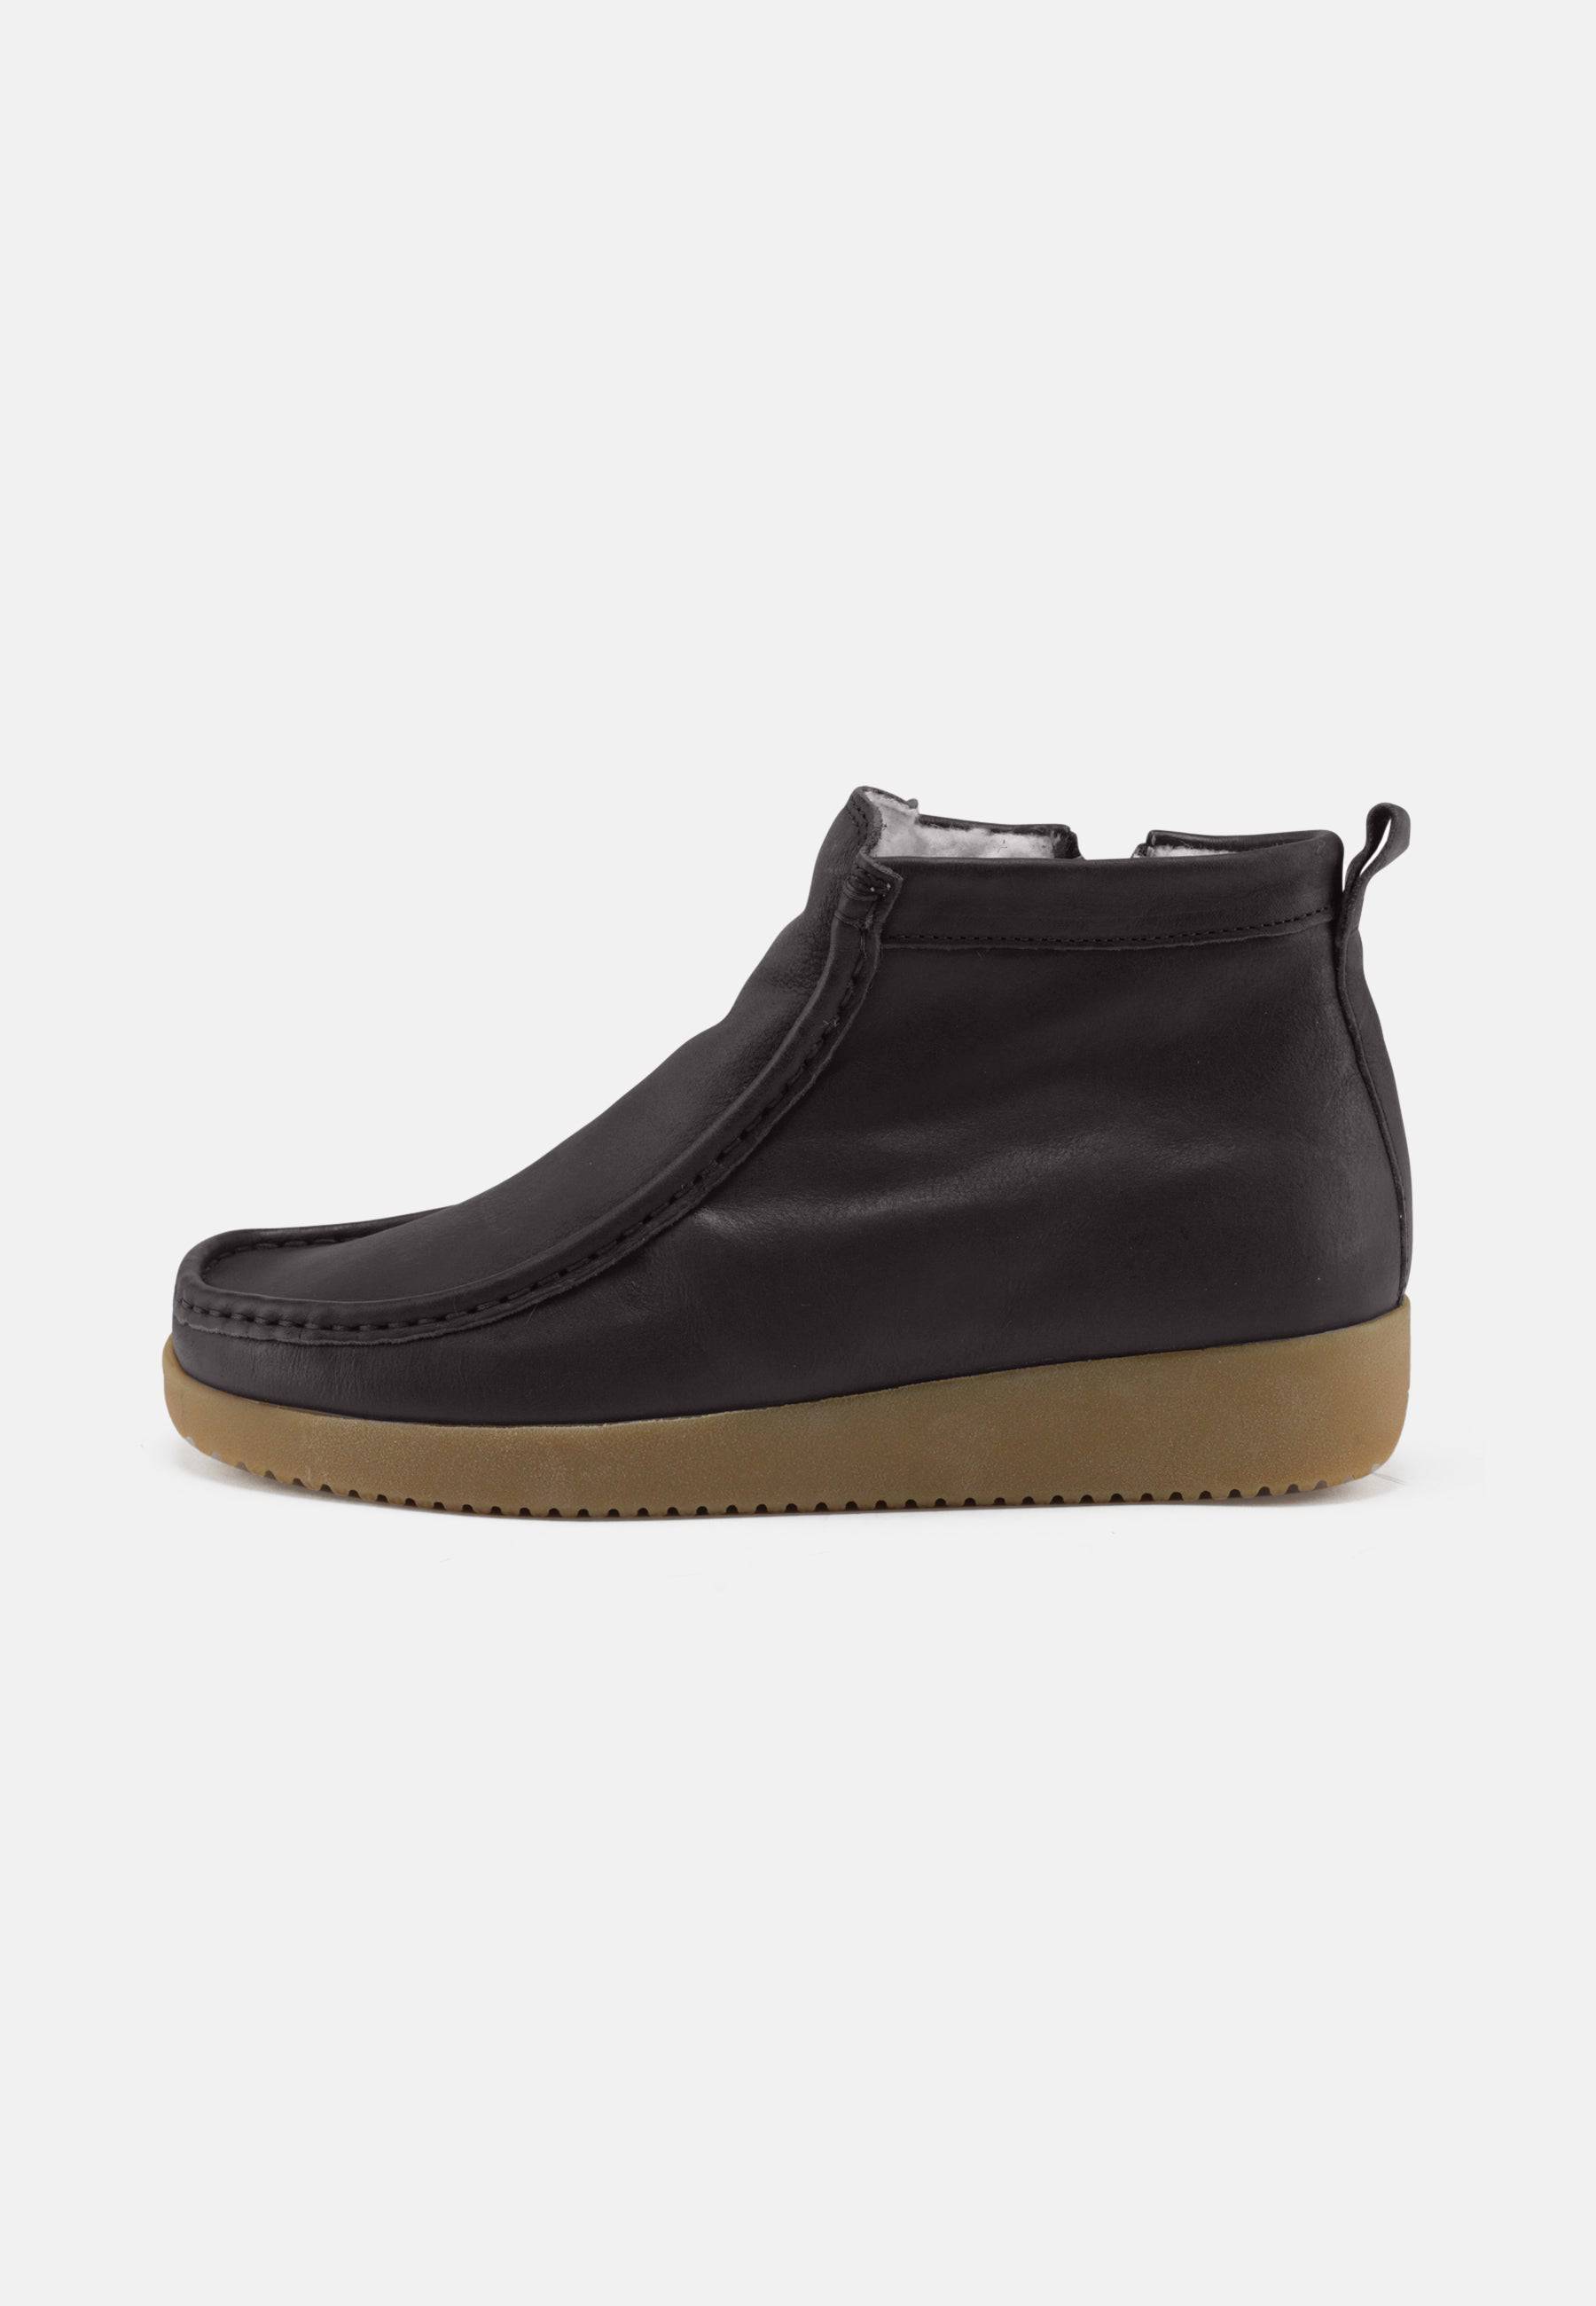 Sofia Warm lined boot Oily Nubuck - Bison